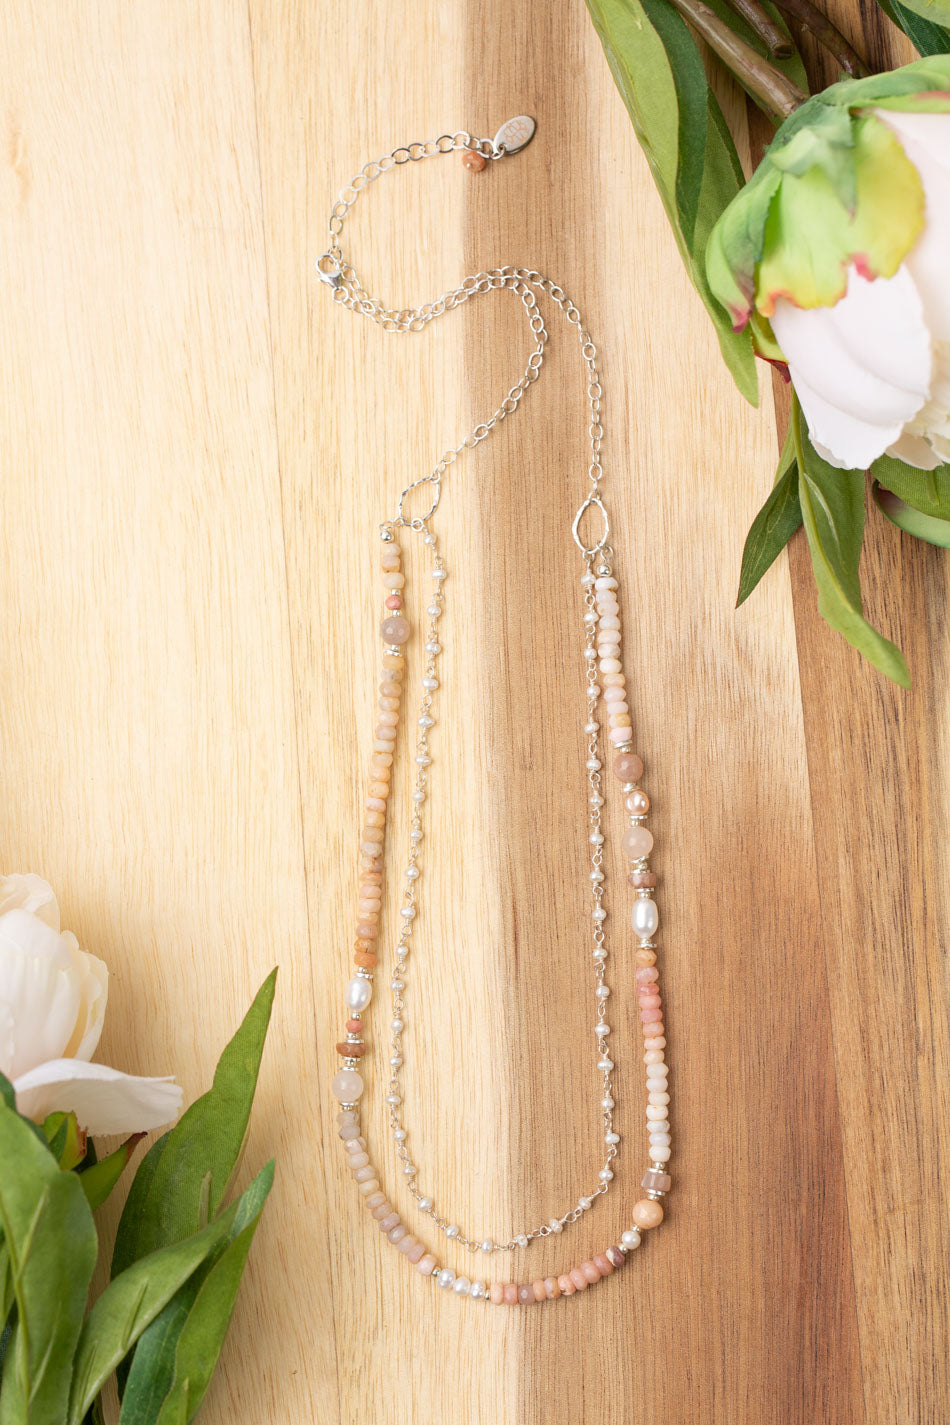 Embrace Peach Moonstone, Cherry Blossom Agate Necklaces And Earrings Set